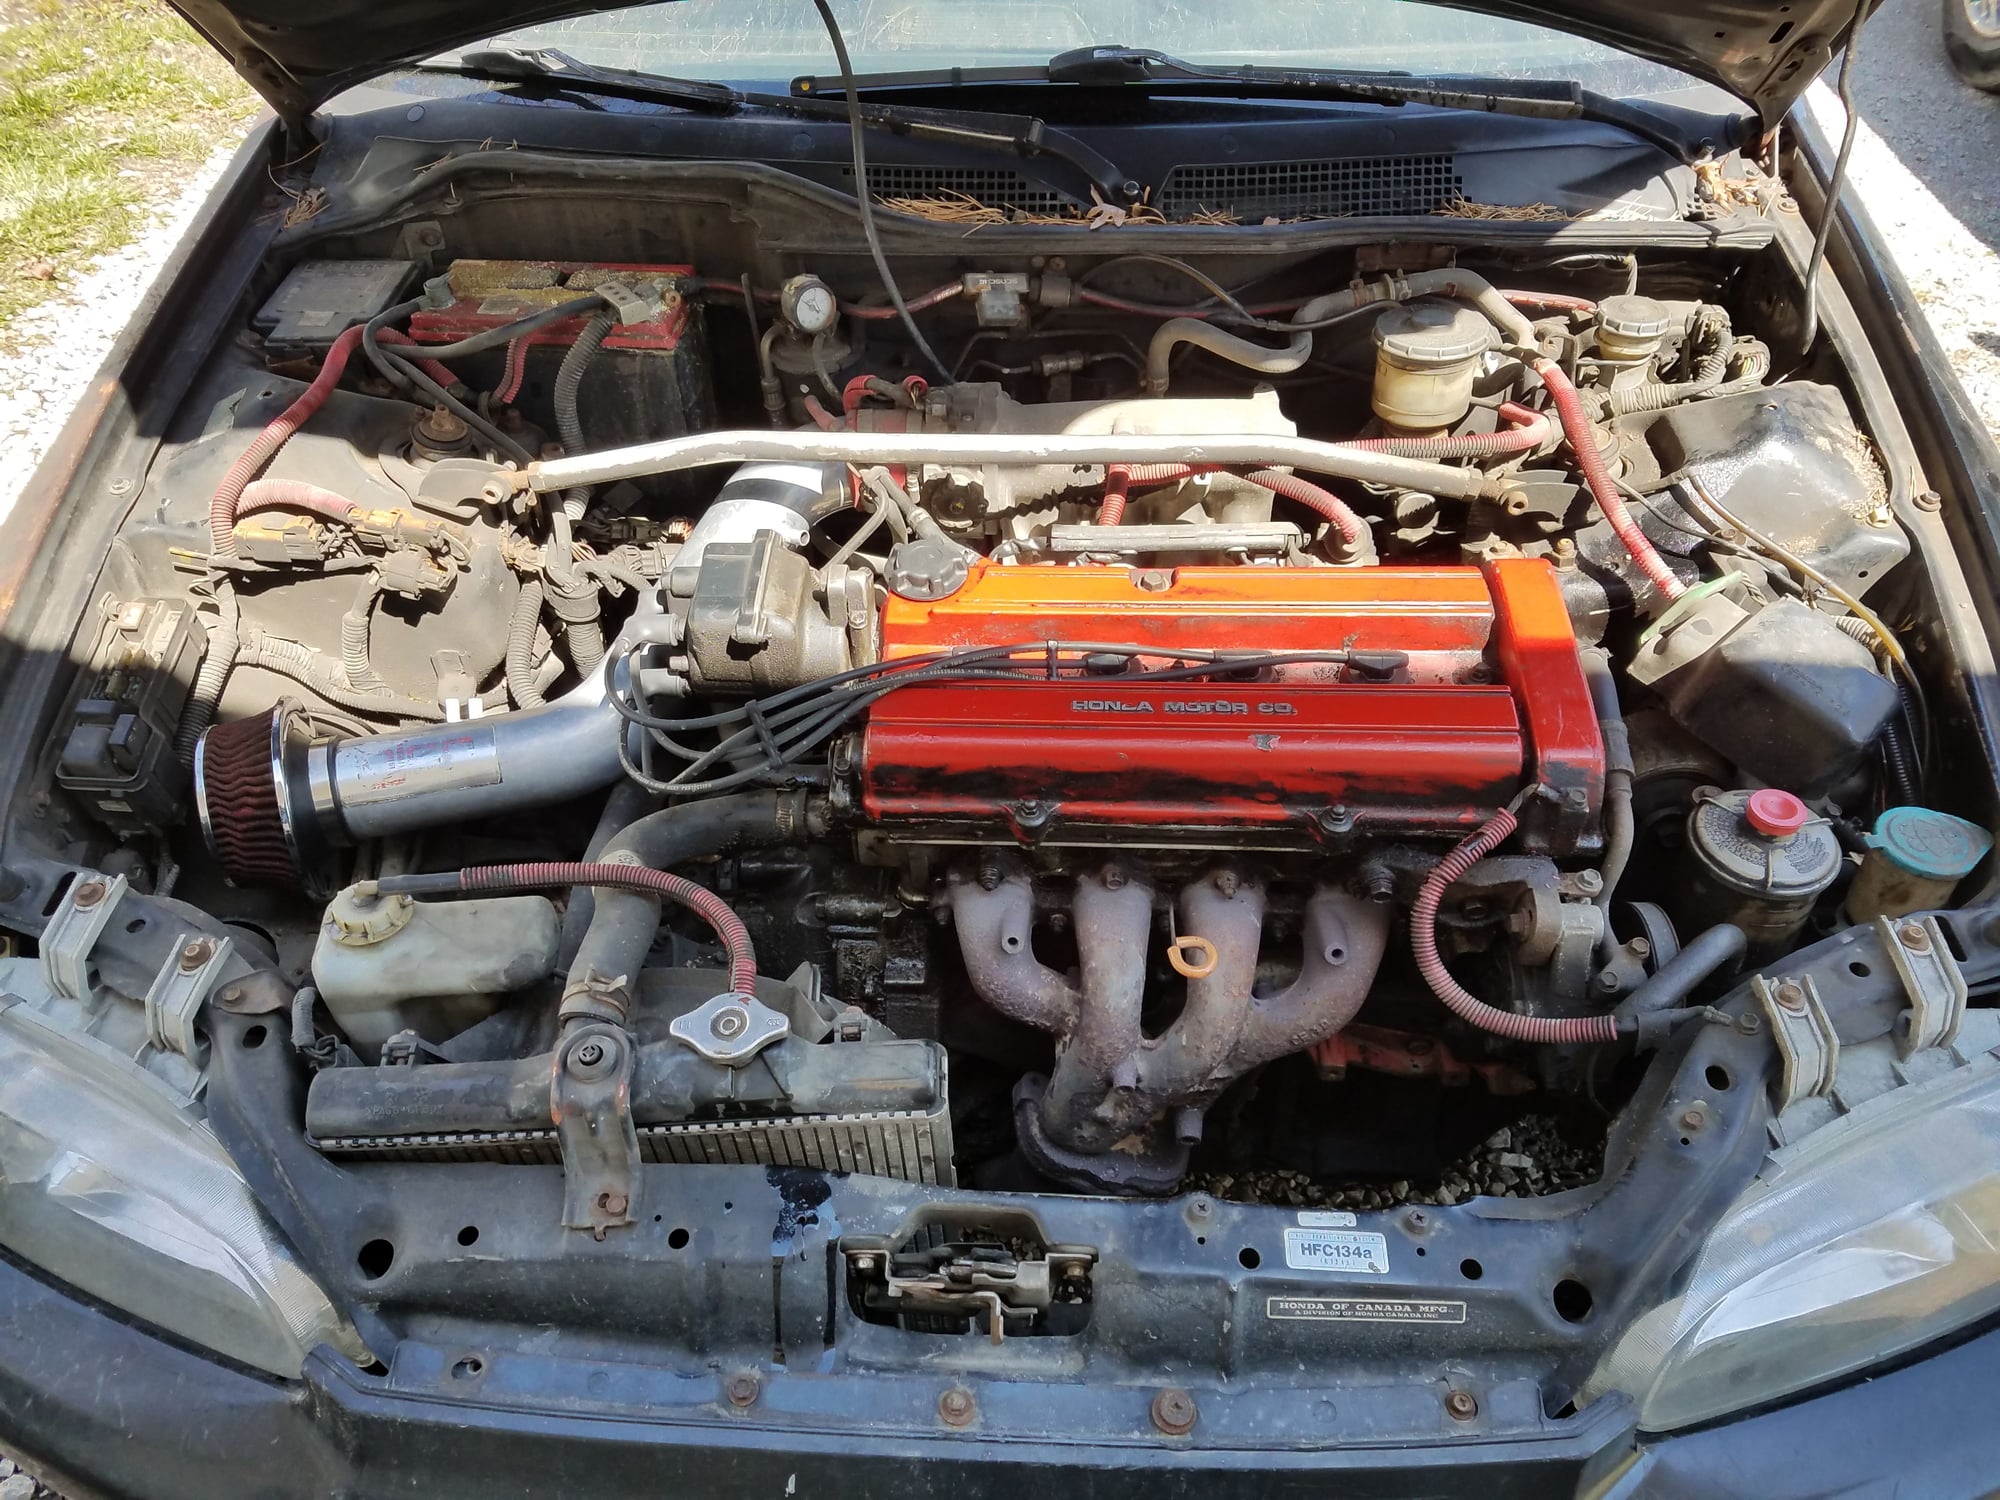 What motor is this? - The unofficial Honda Forum and Discussion Board